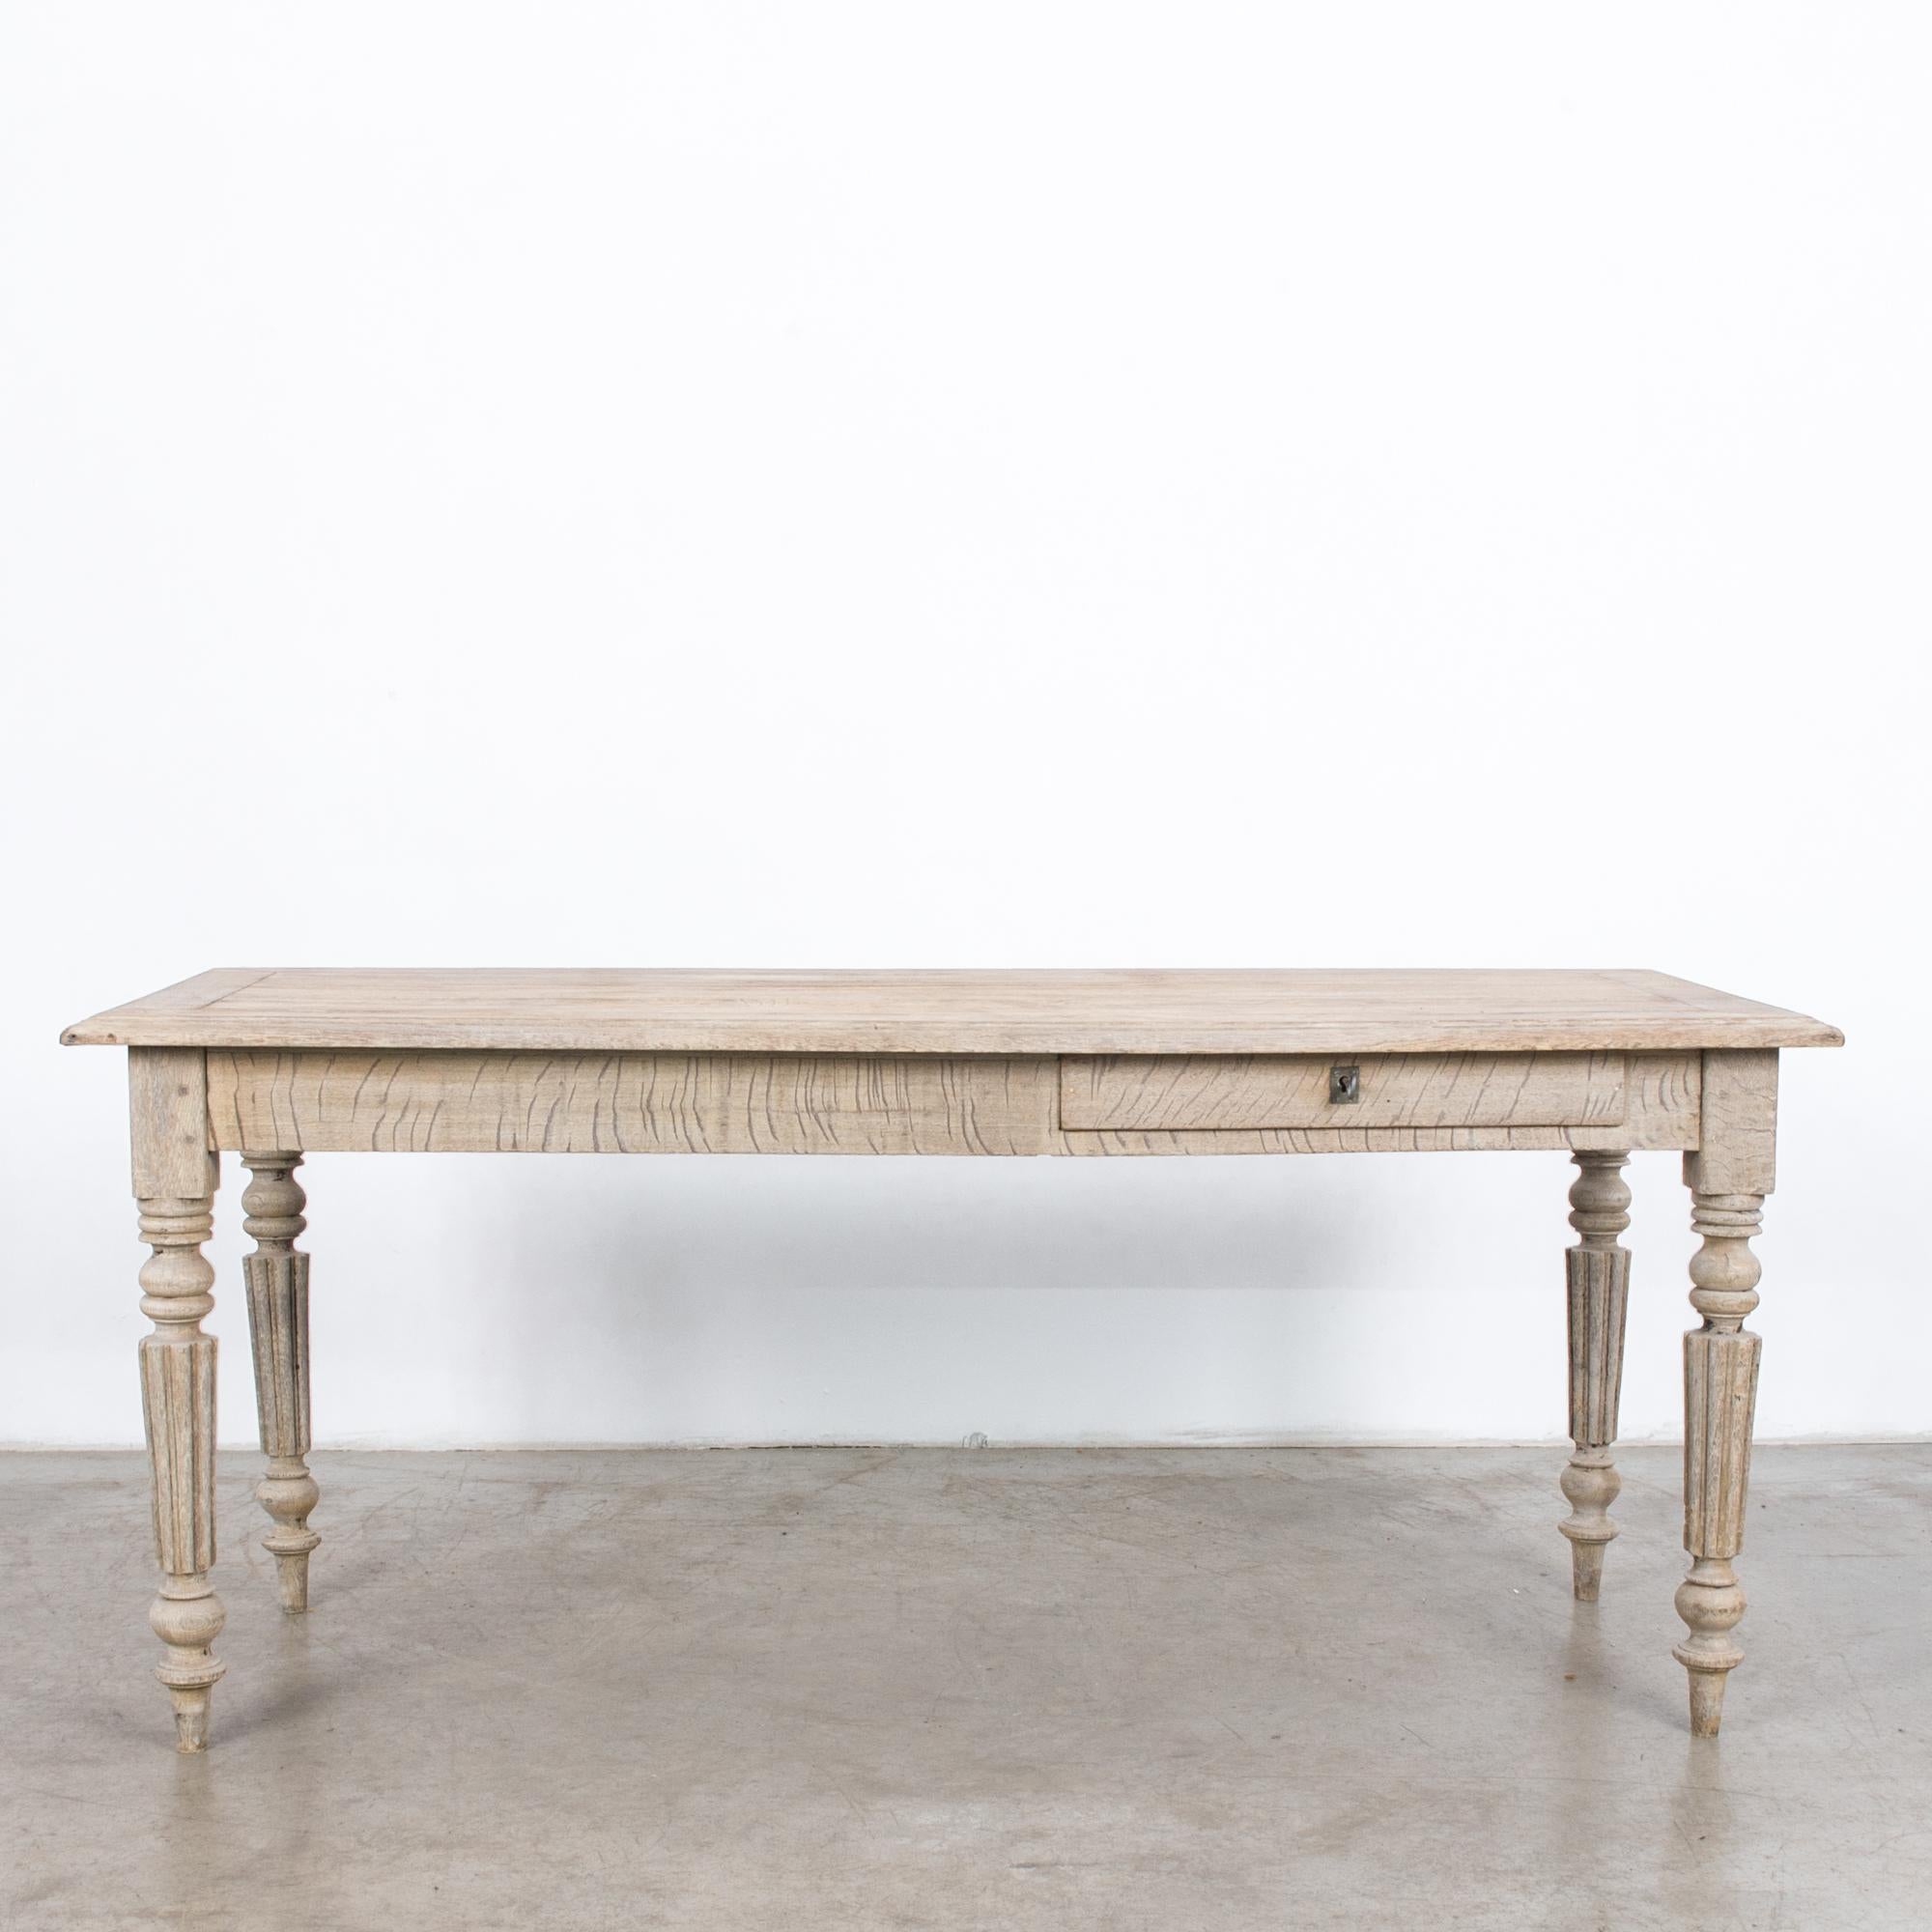 An oak dining table from France, circa 1900. A broad tabletop sits atop a square apron with a small pull out drawer, closing with lock and key. Turned and fluted legs taper down to a graceful point. The oak has been restored to a light finish,